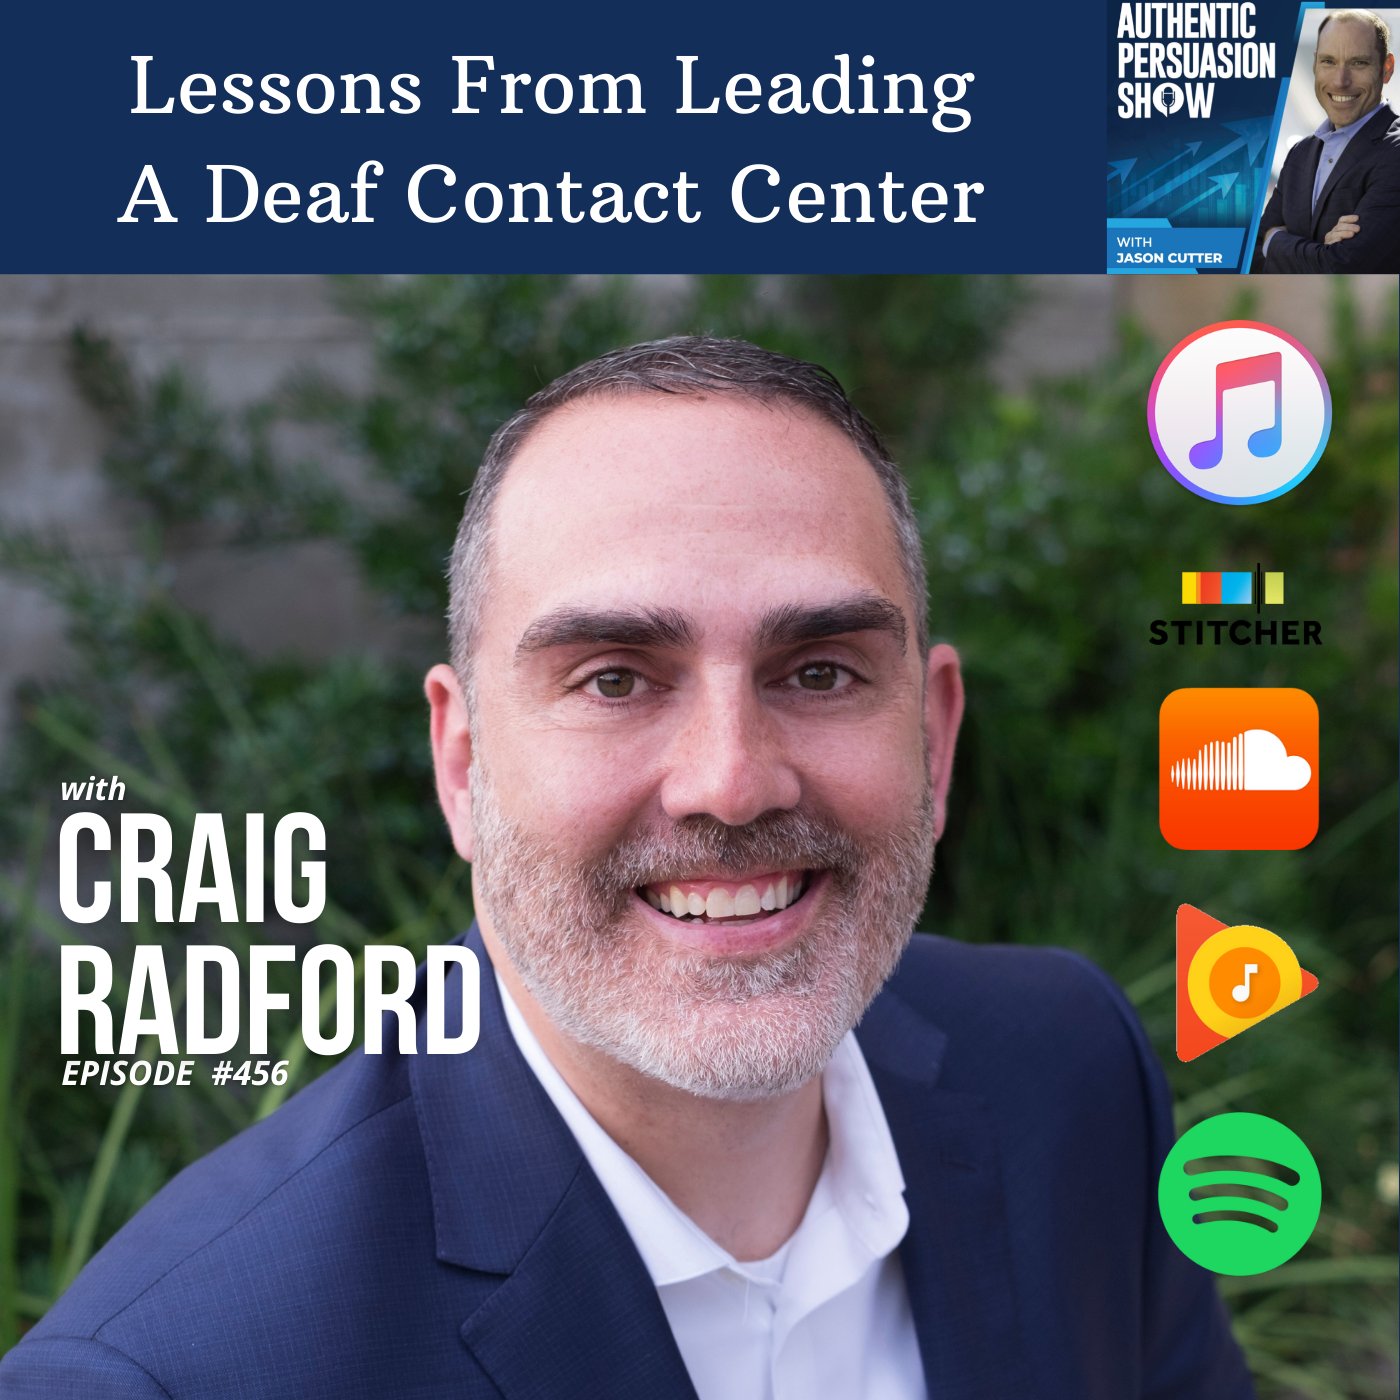 [456] Lessons From Leading A Deaf Contact Center, with Craig Radford from CSD